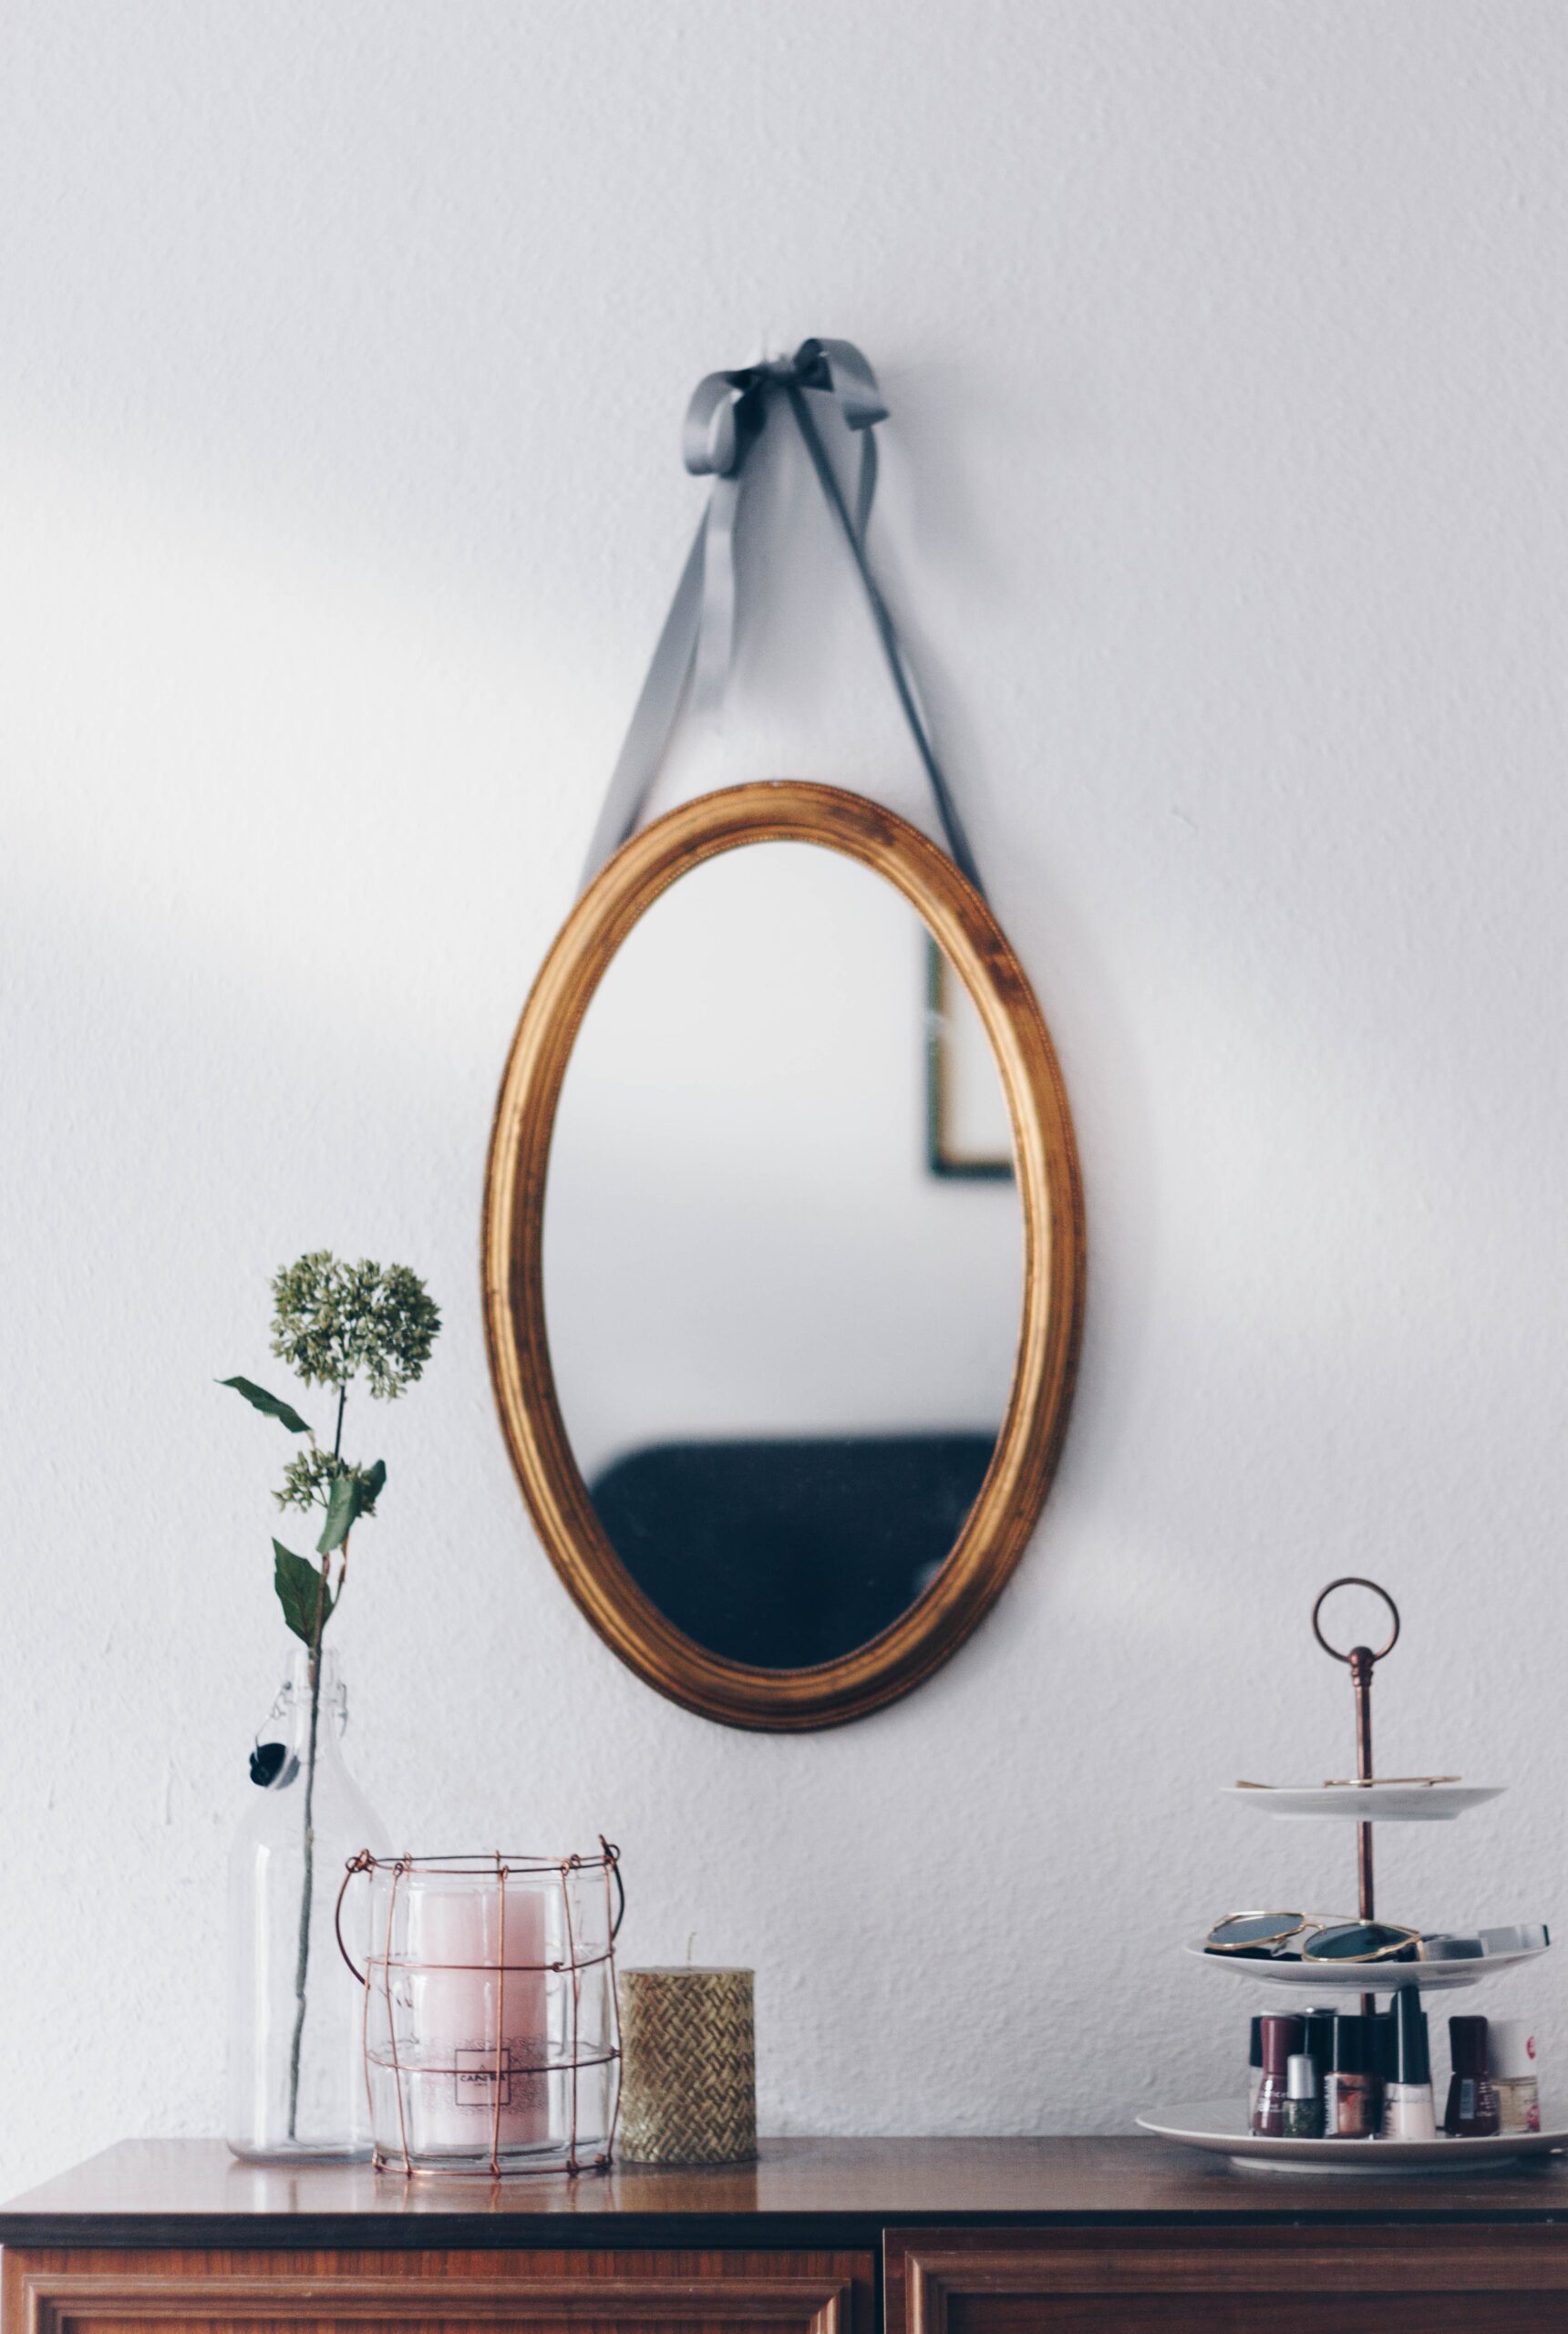 Hanging Mirrors on The Wall